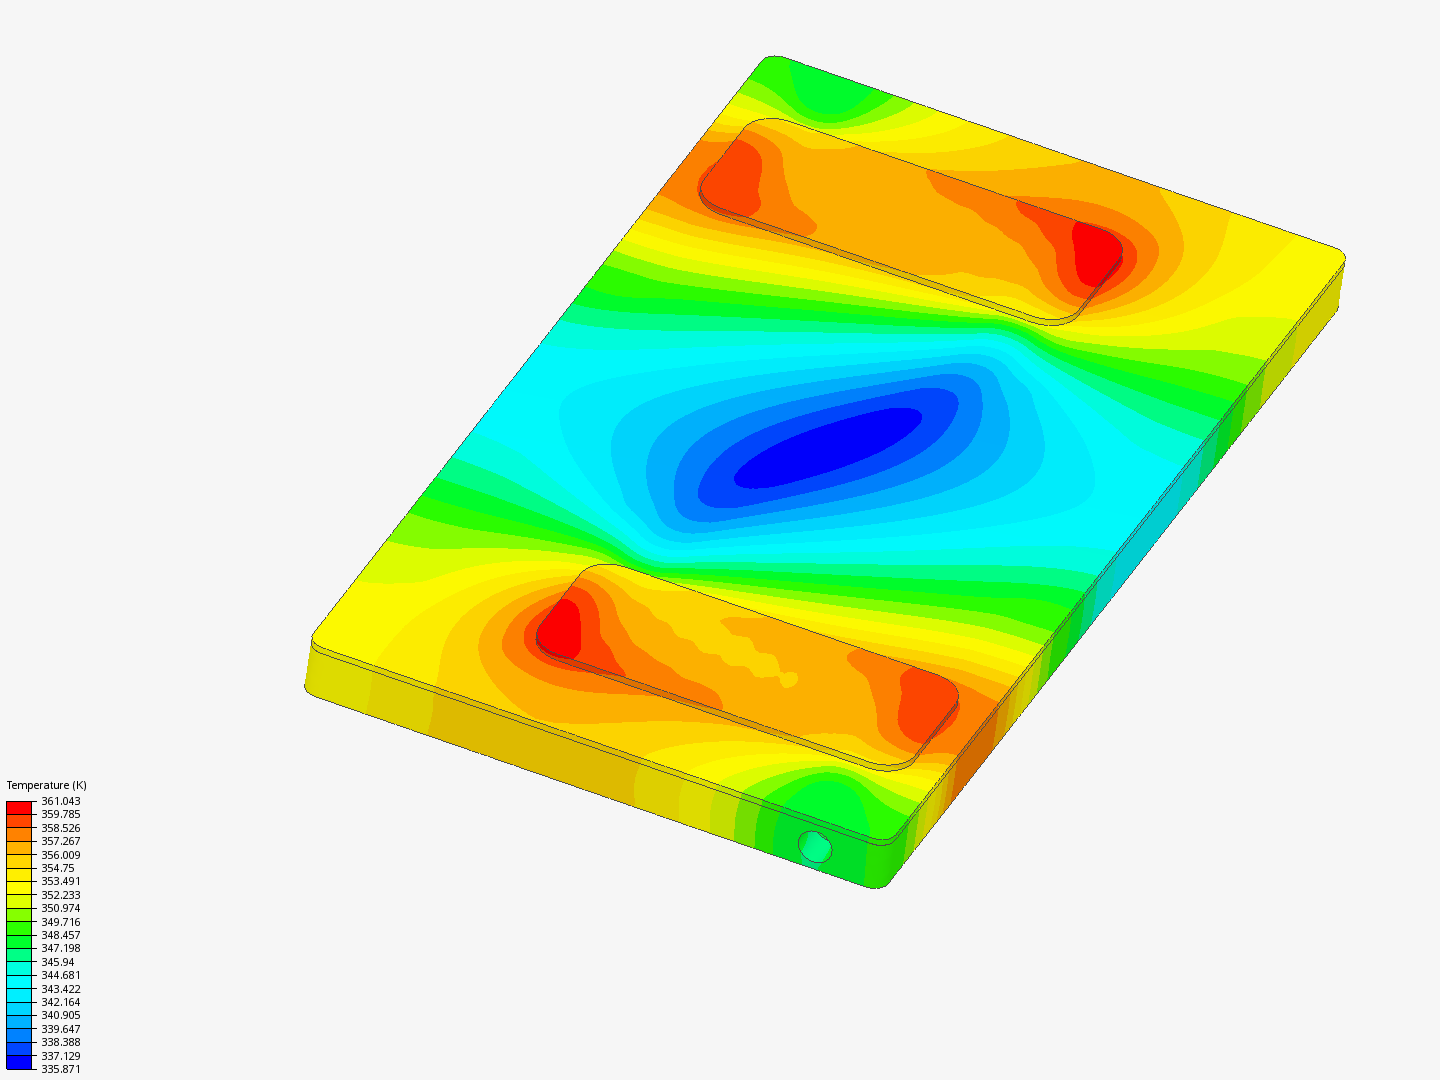 cooling plate image